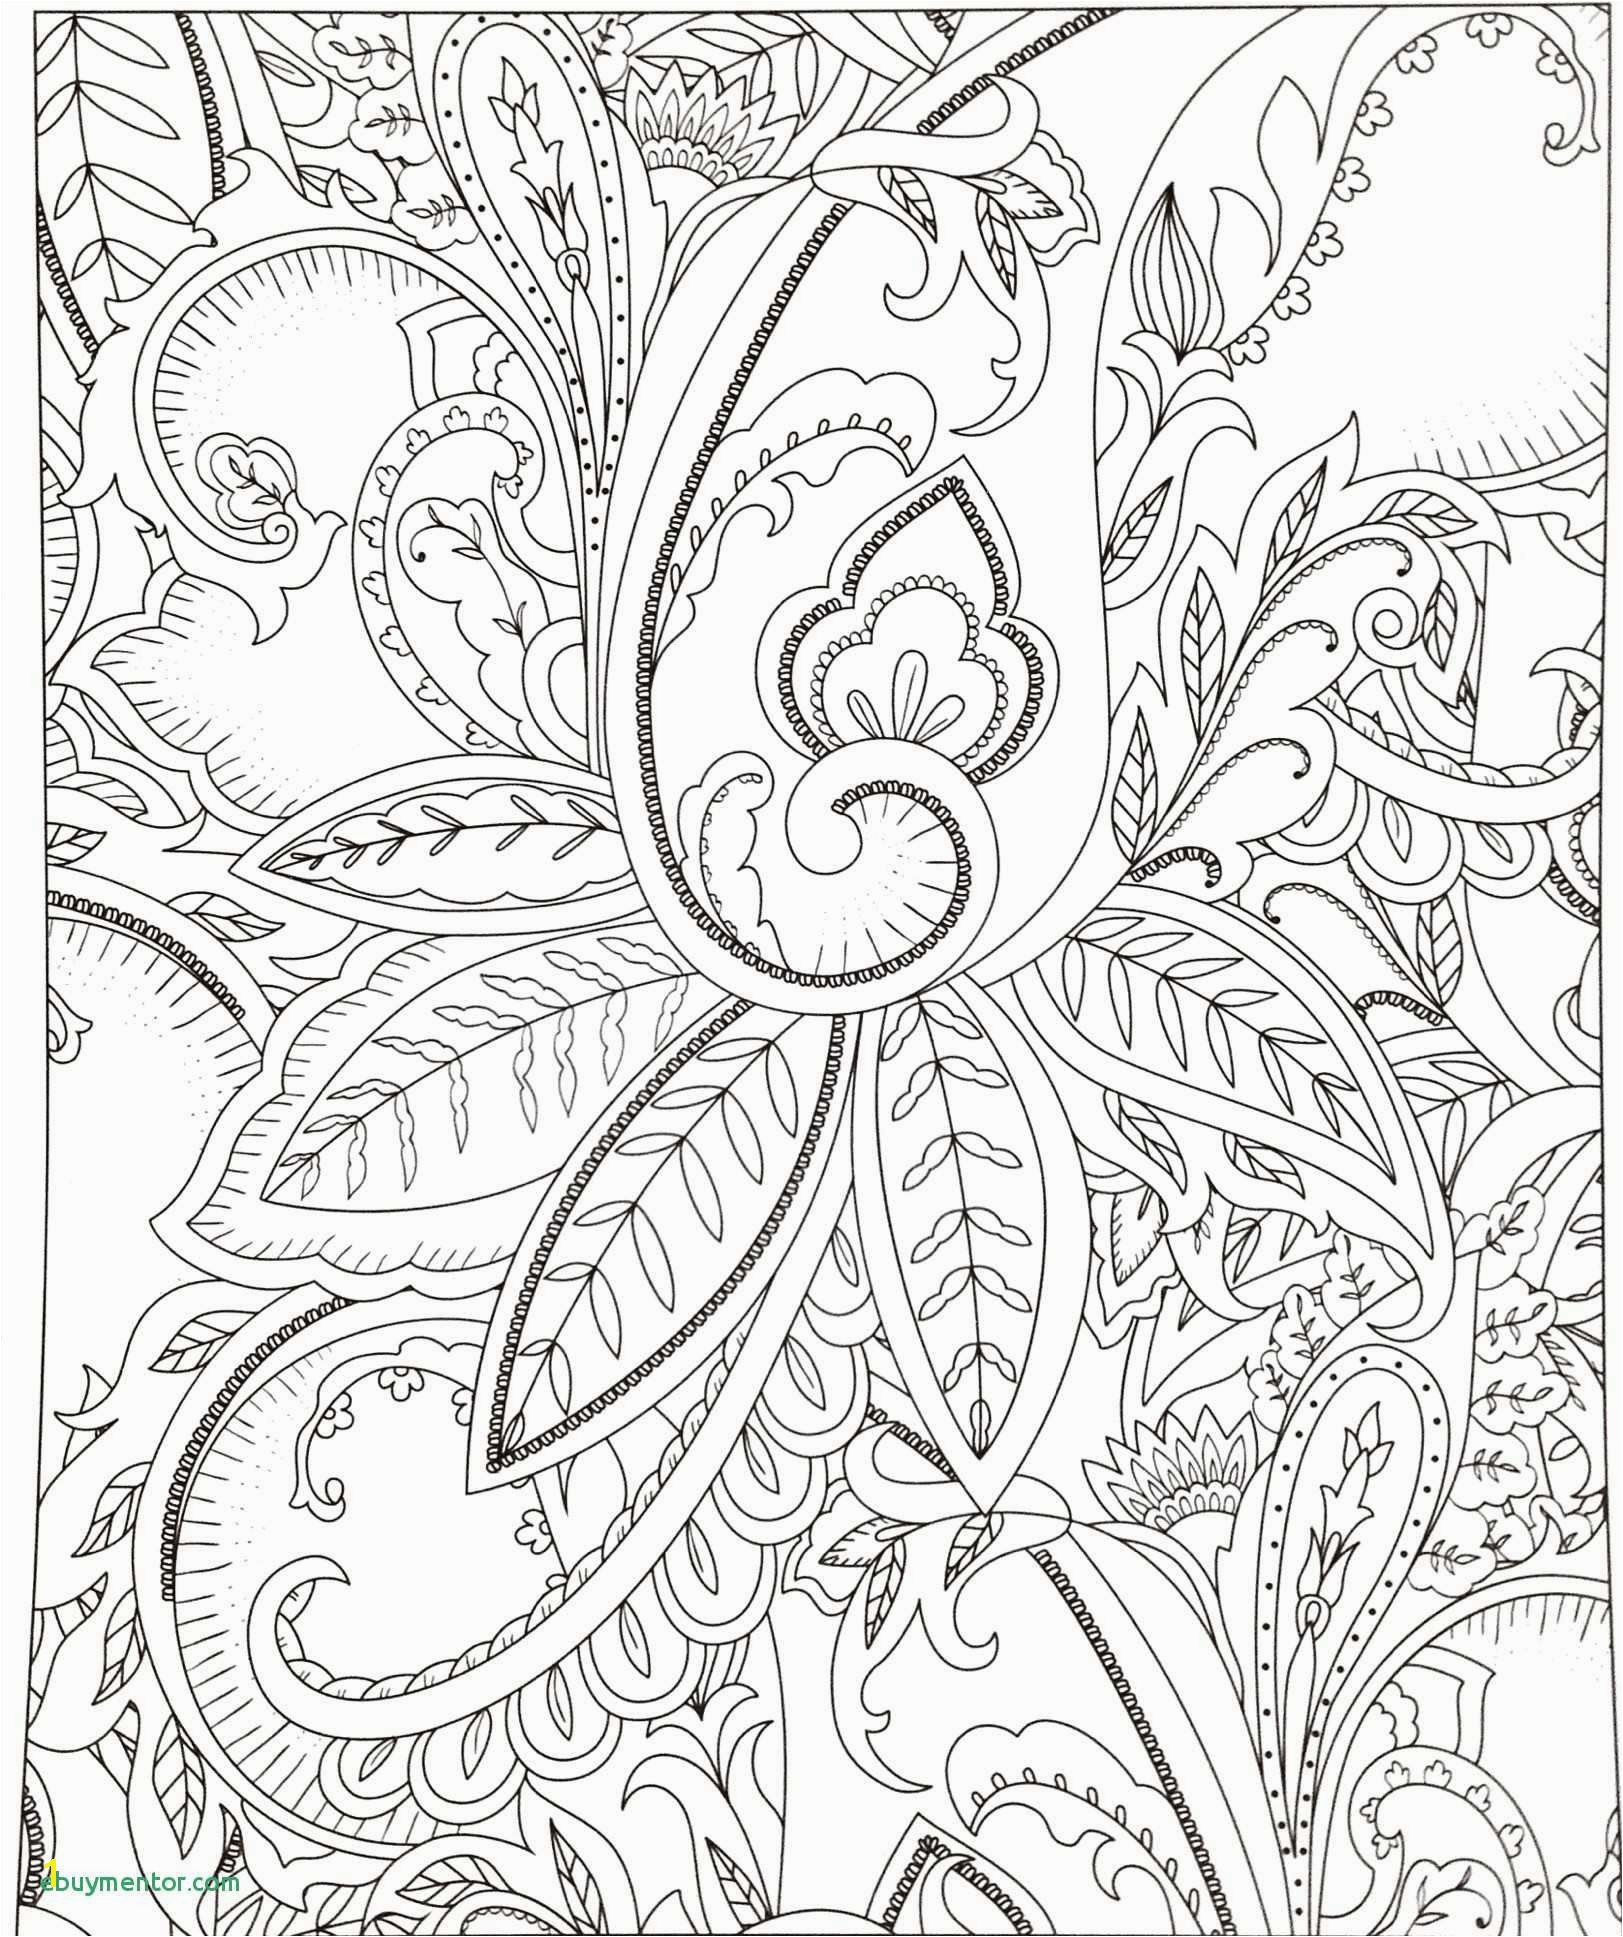 Chirstmas Coloring Pages Christmas Coloring Pages for Adults Printable Coloring Chrsistmas